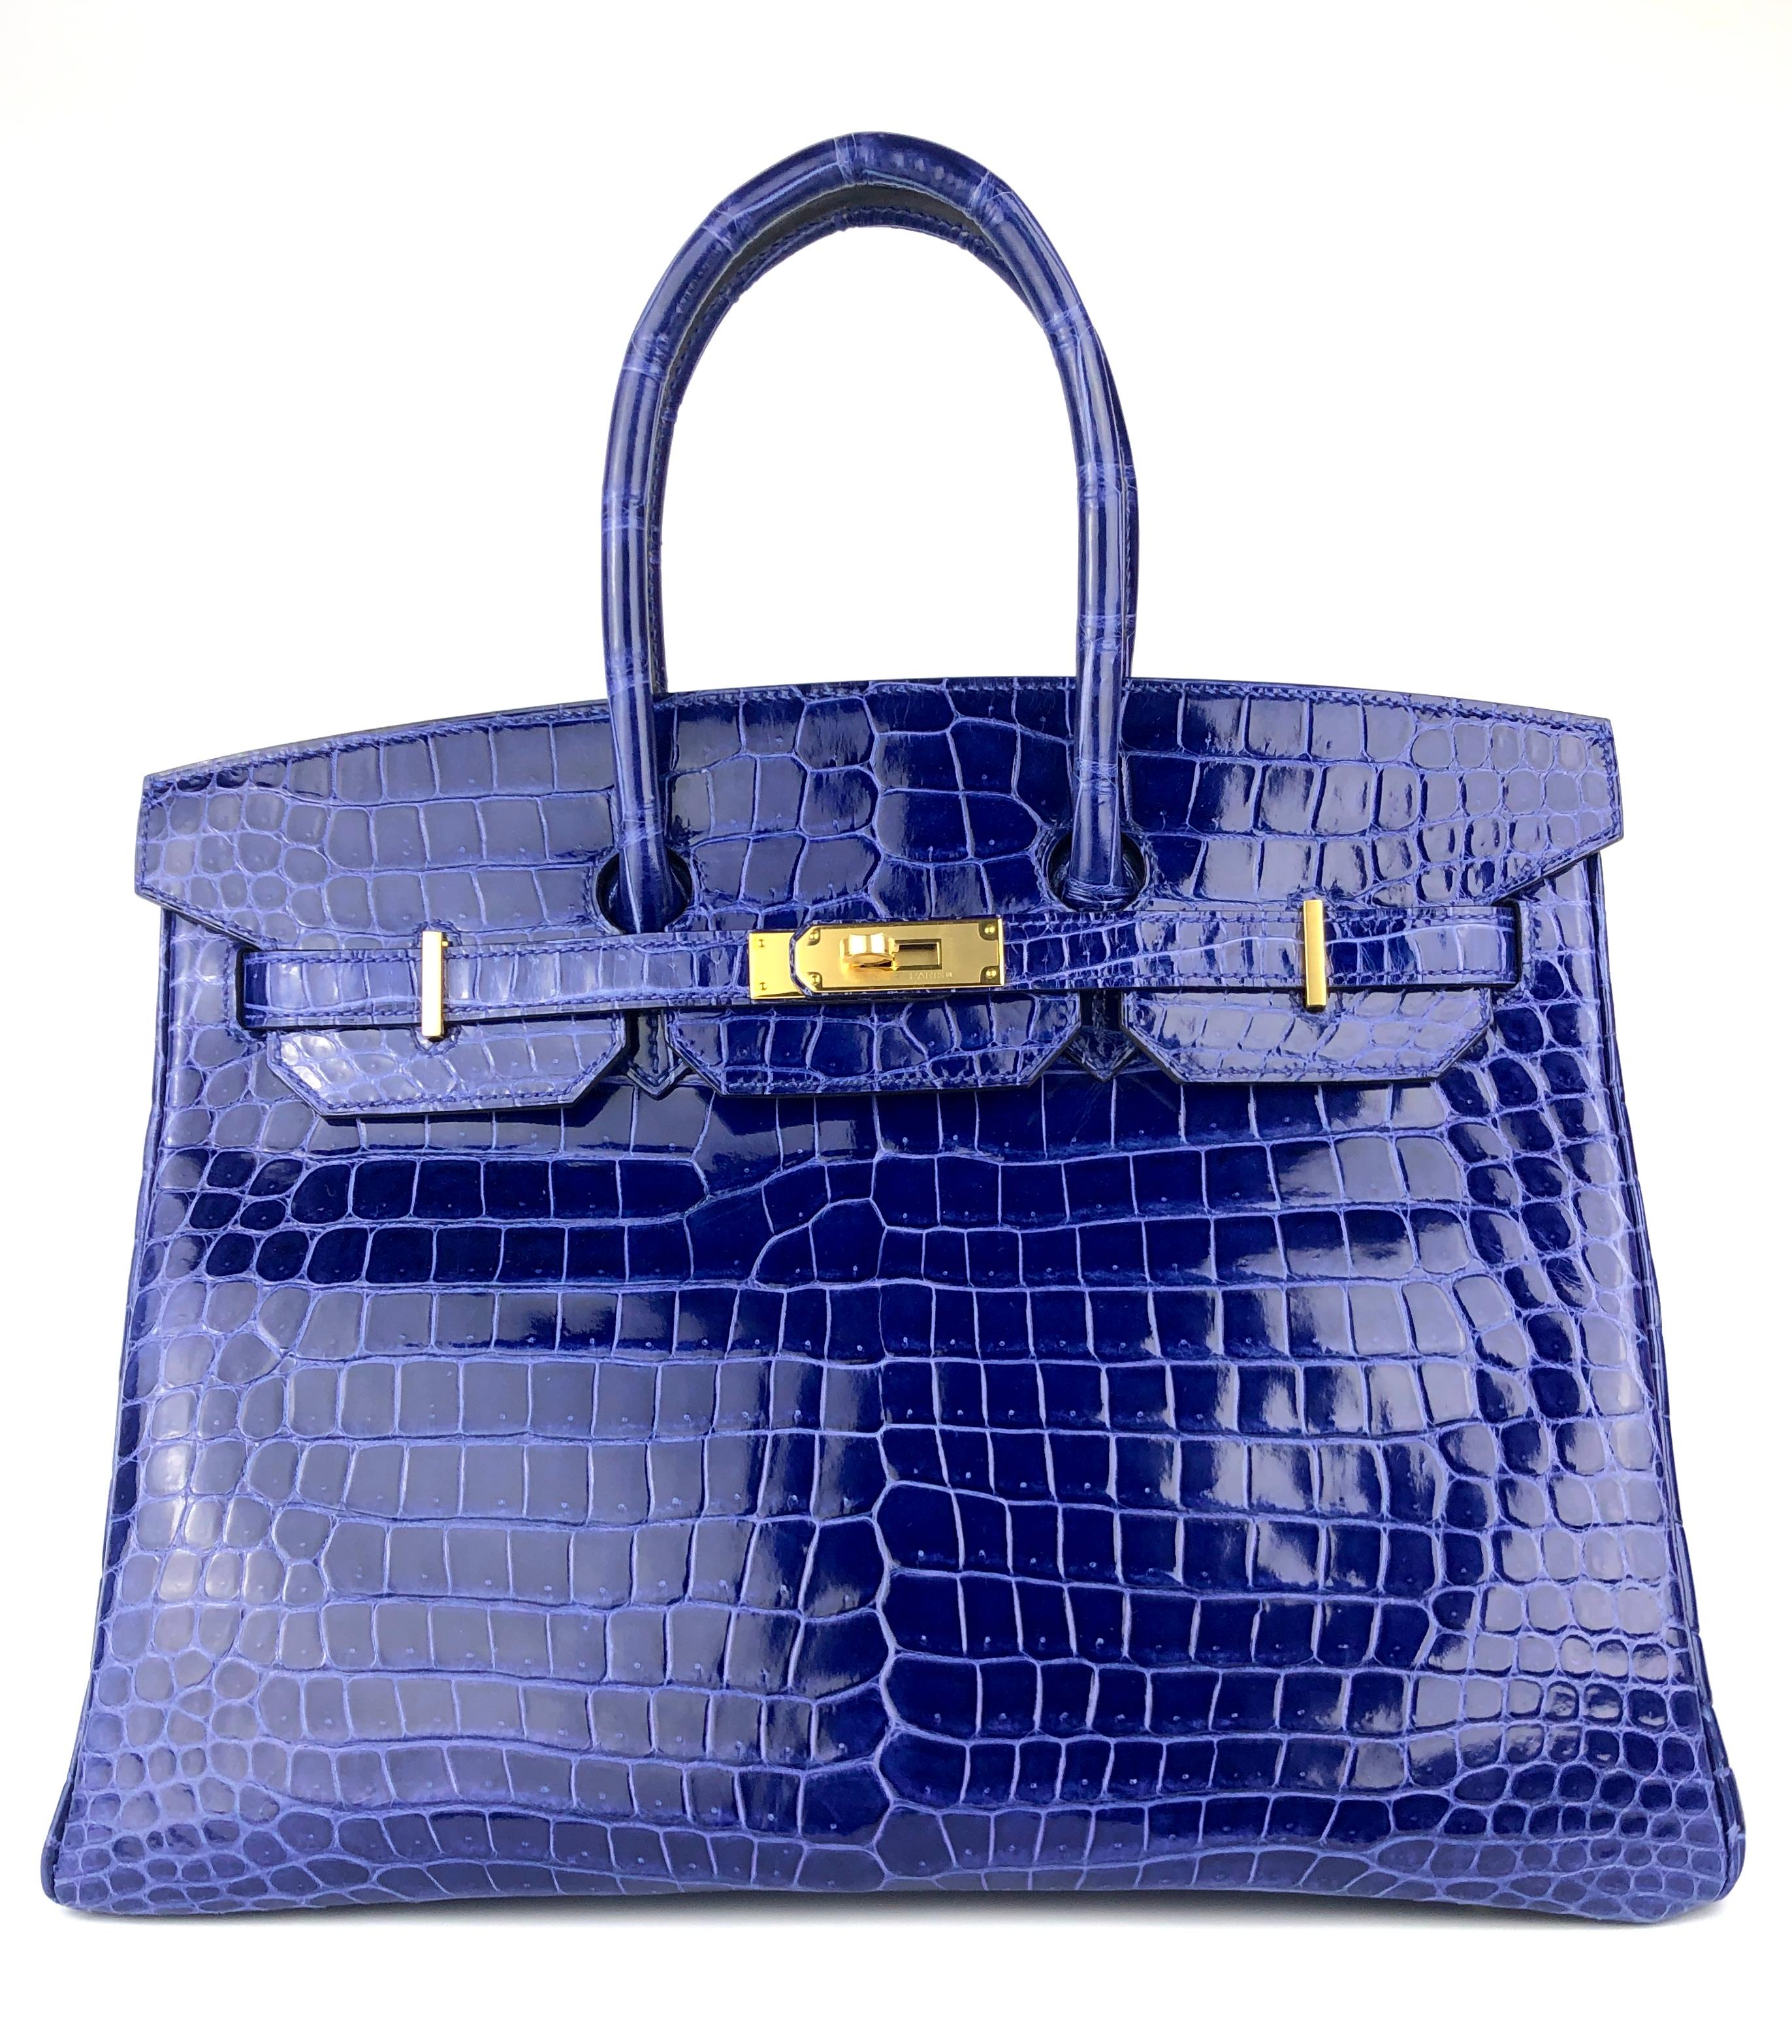 Absolutely Stunning RARE Hermes Birkin 35 Blue Electric Crocodile Skin Leather Gold Hardware. Pristine Condition, Plastic on hardware, perfect structure and corners. 

BEST PRICE ON THE MARKET! 

Please keep in mind that this is a pre owned item,